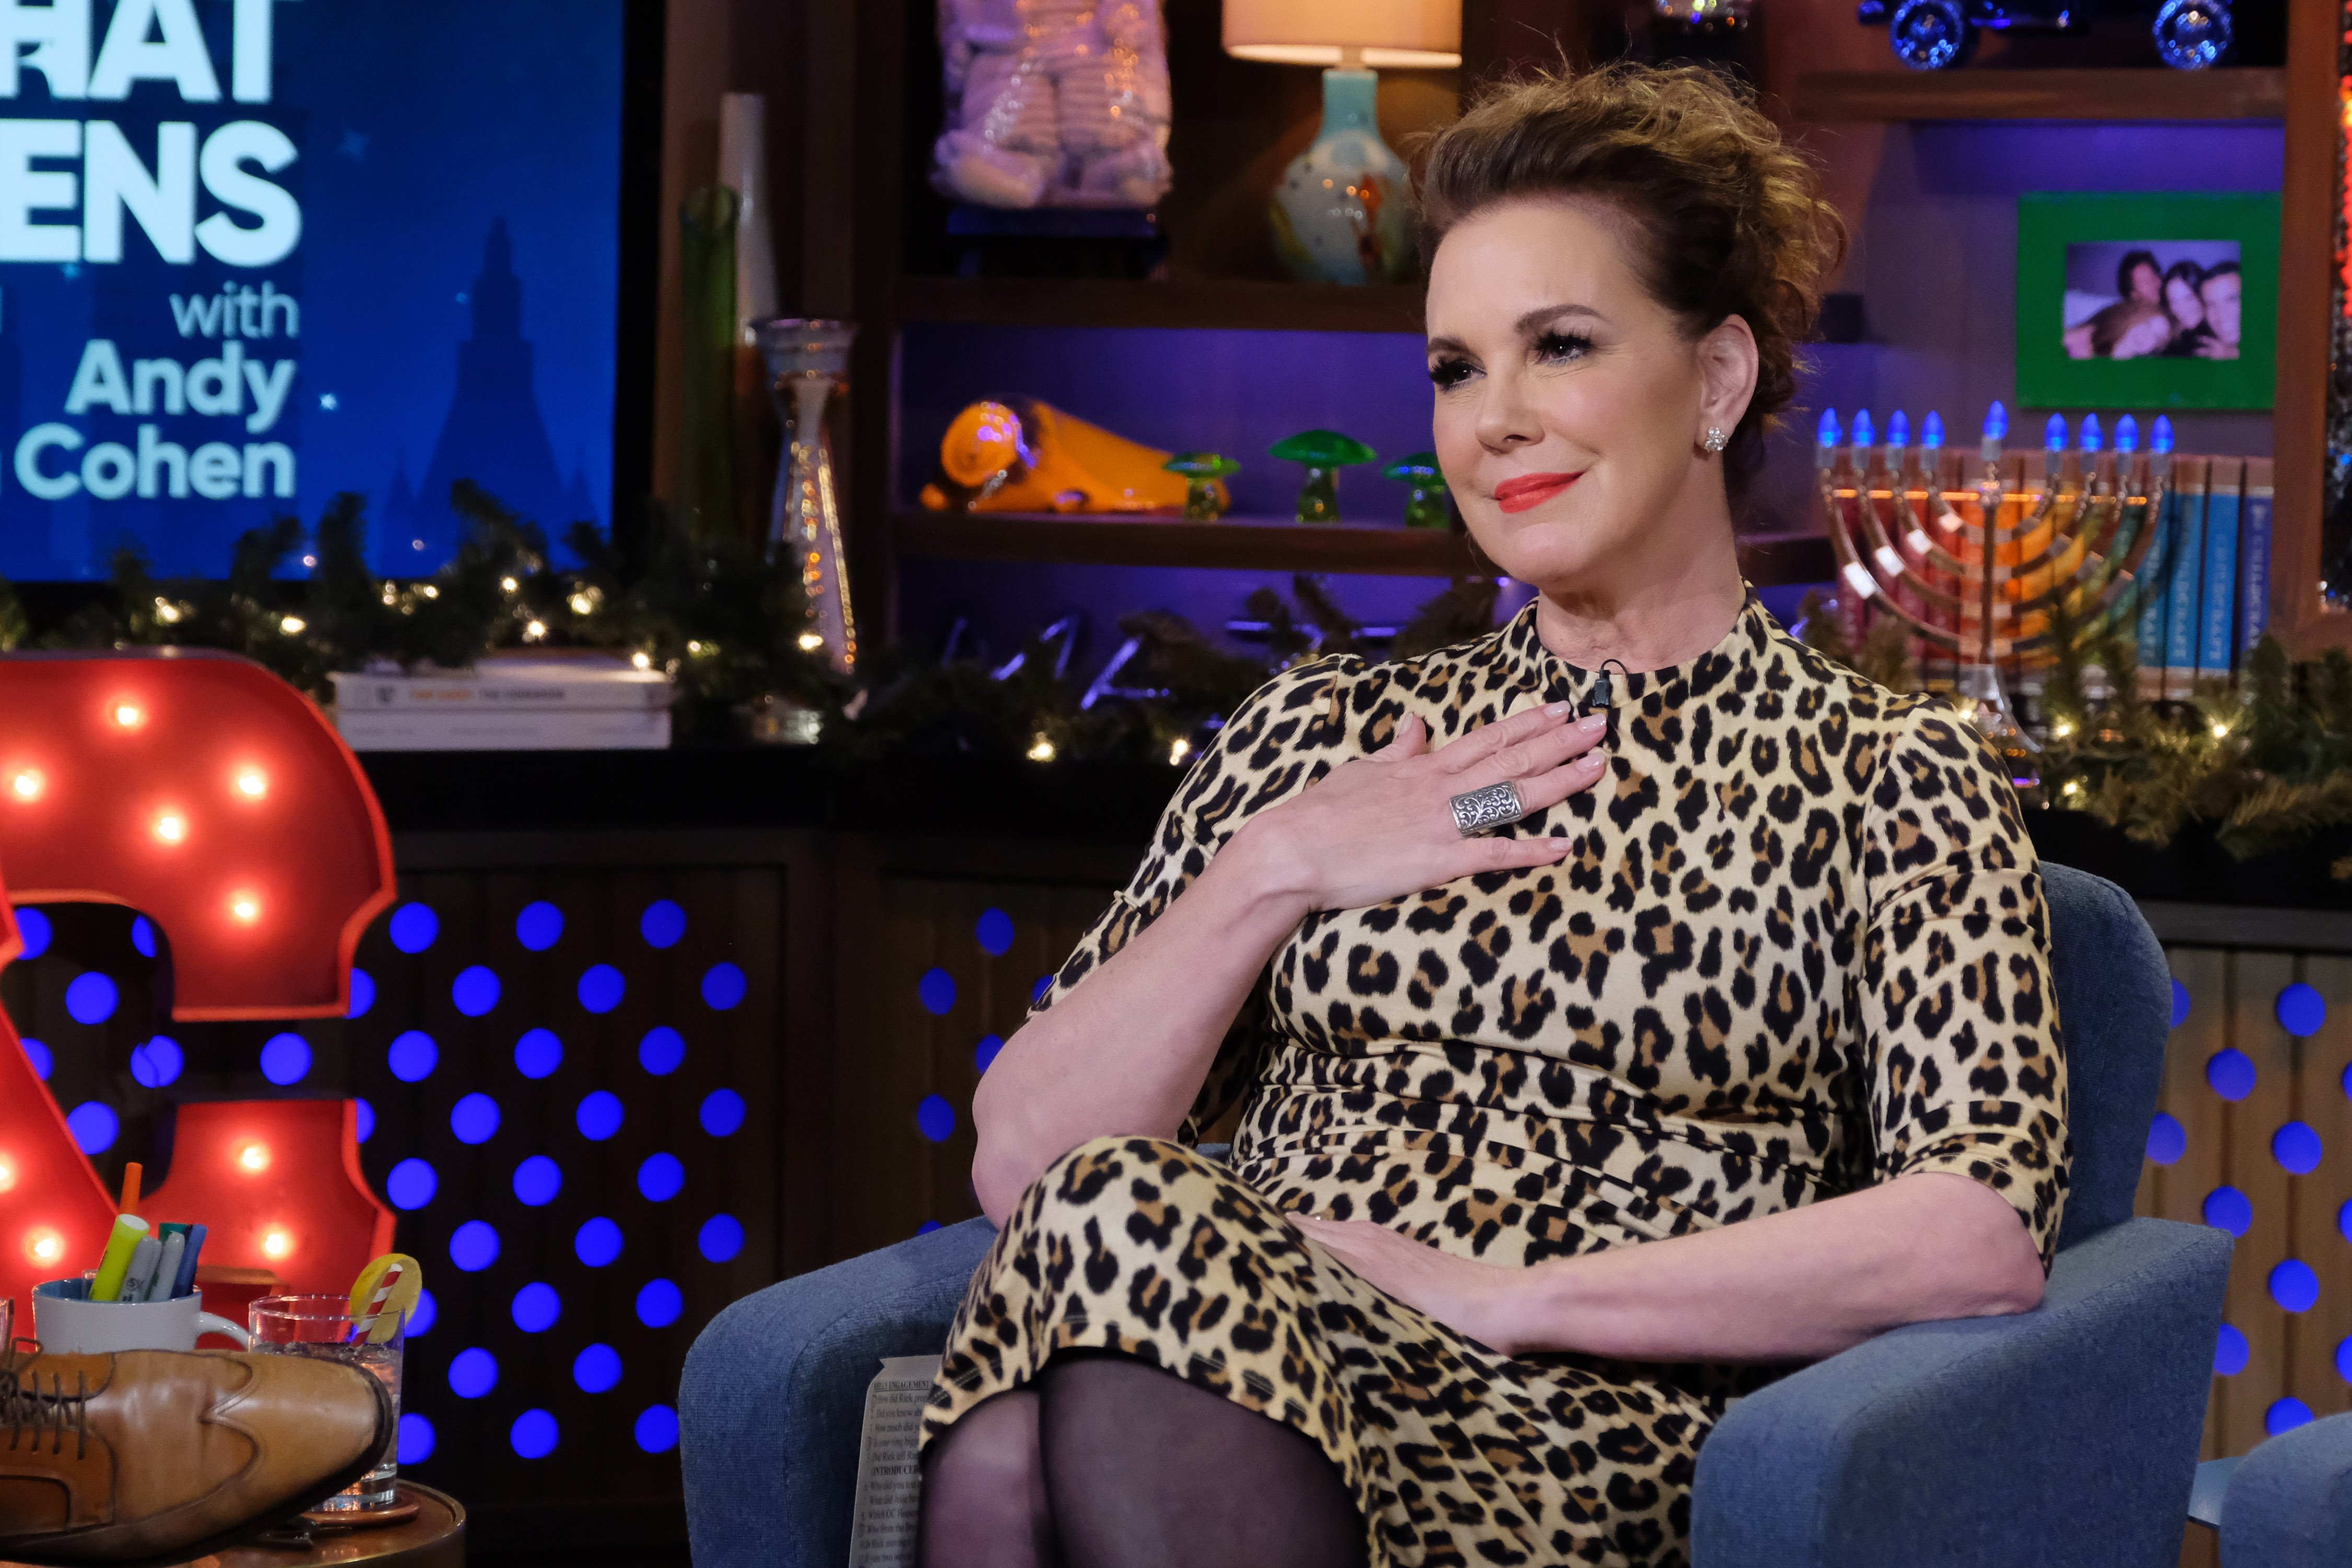 Elizabeth Perkins in Episode 16196 of 'Watch What Happens Live with Andy Cohen' | Photo: Getty Images